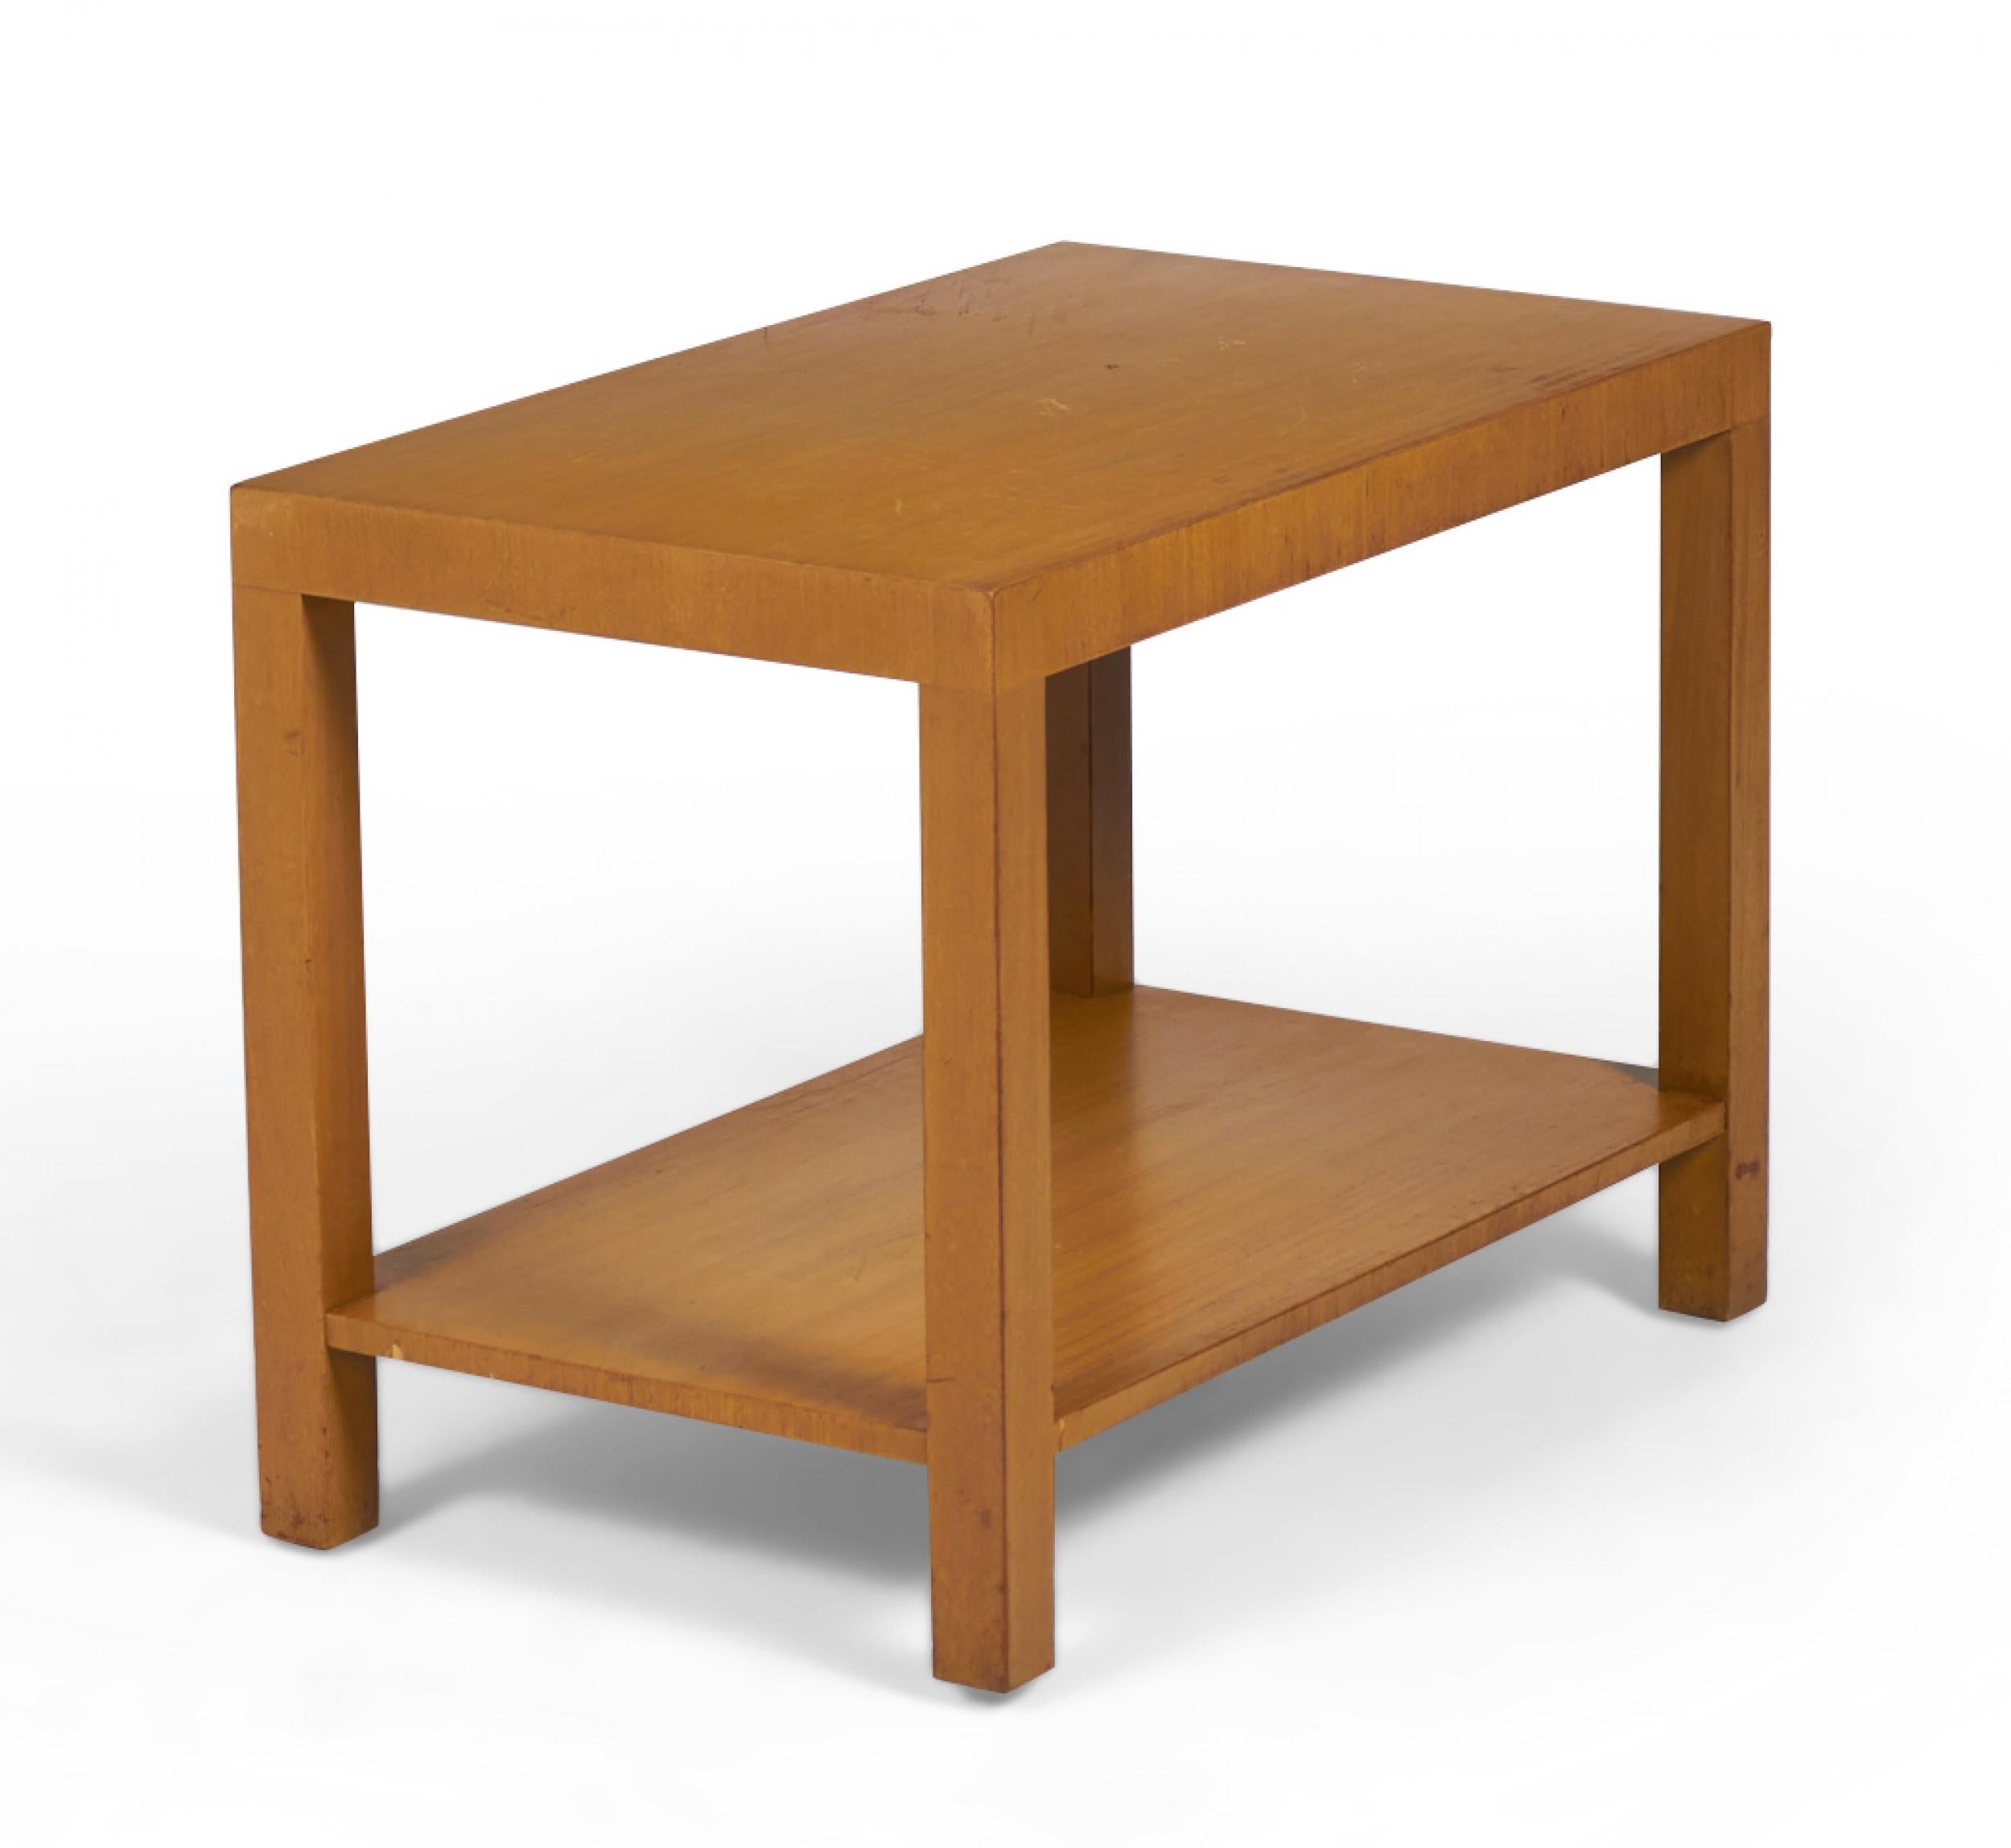 Pair of Widdicomb Modern American Mid-Century Parsons Style Wooden End Tables In Good Condition For Sale In New York, NY